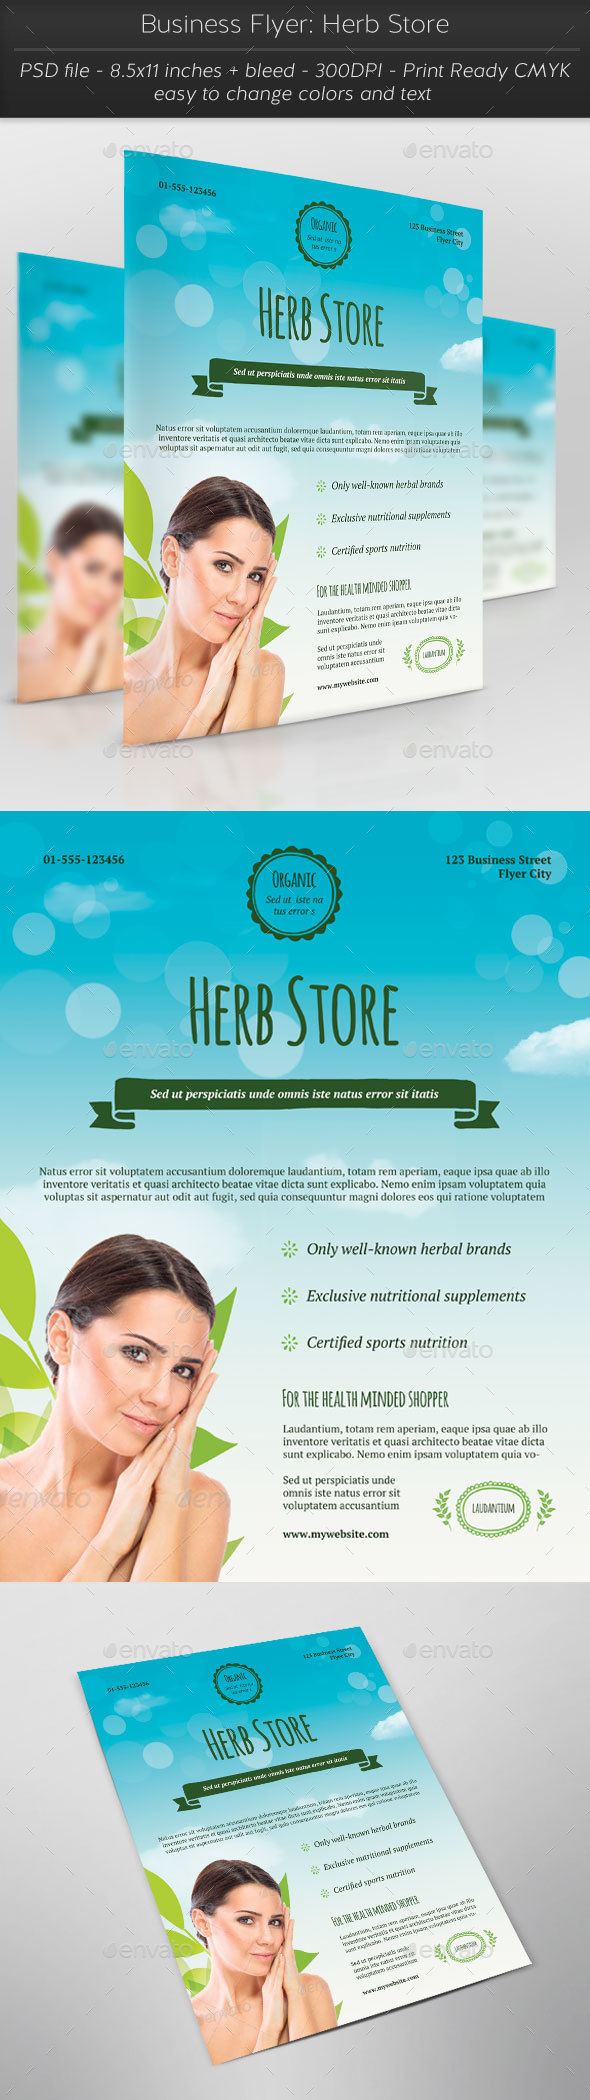 Business Flyer: Herb Store